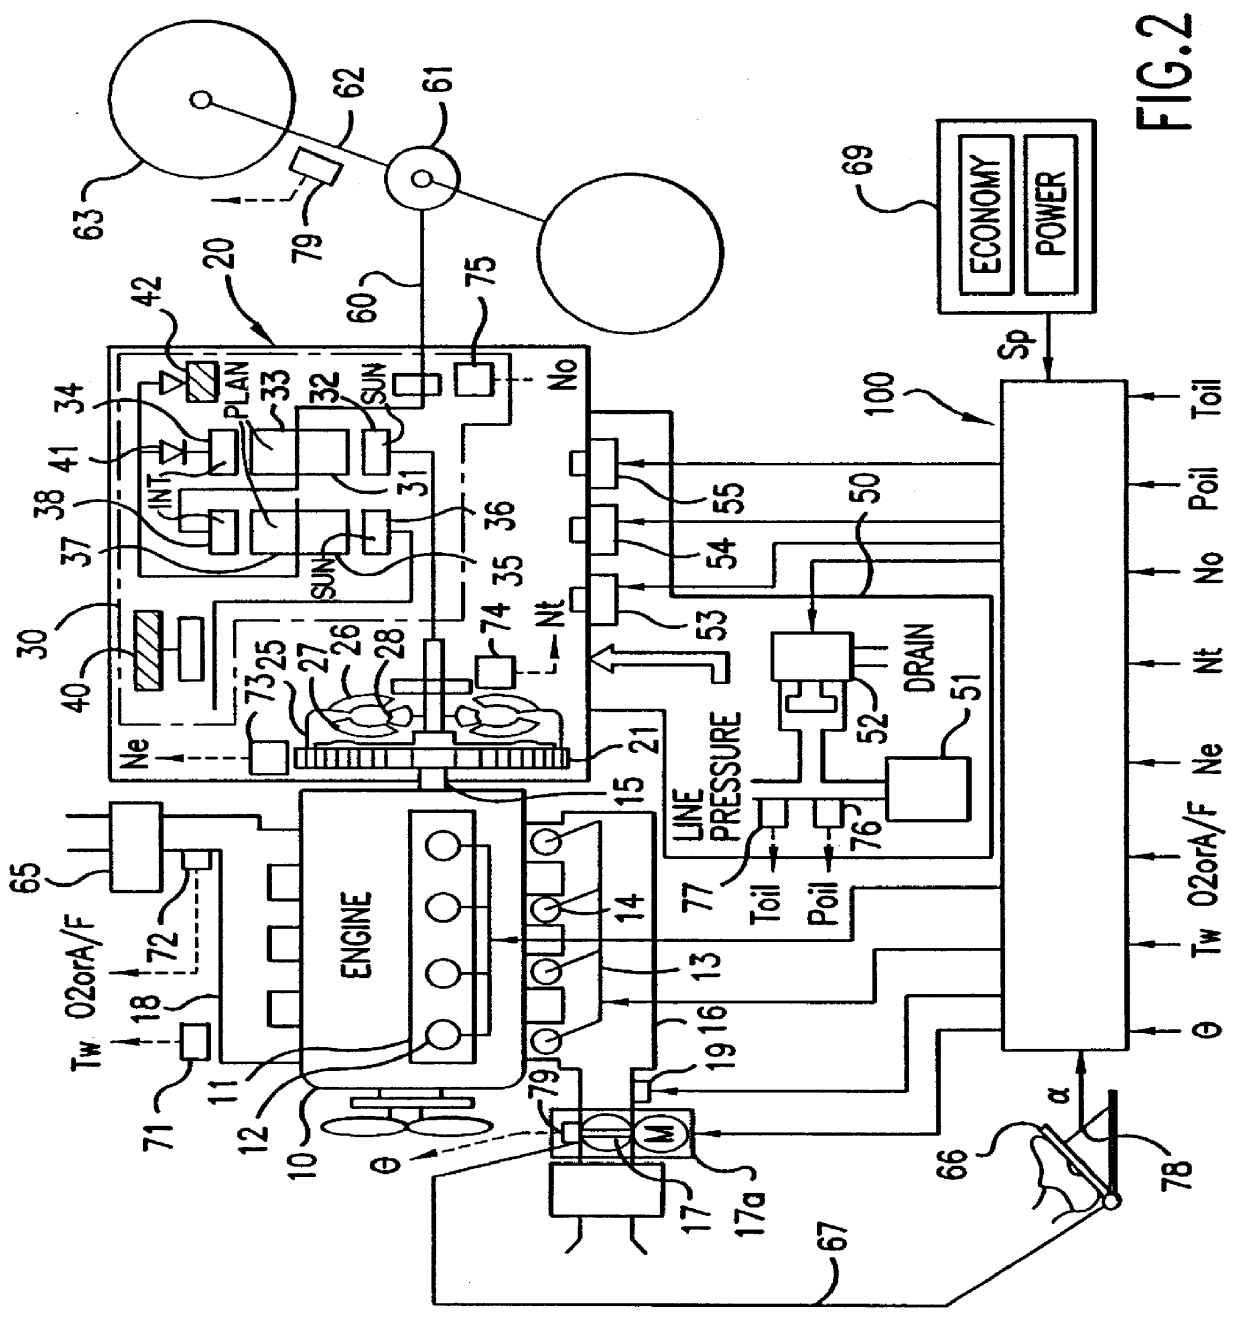 Driving force control system for a vehicle